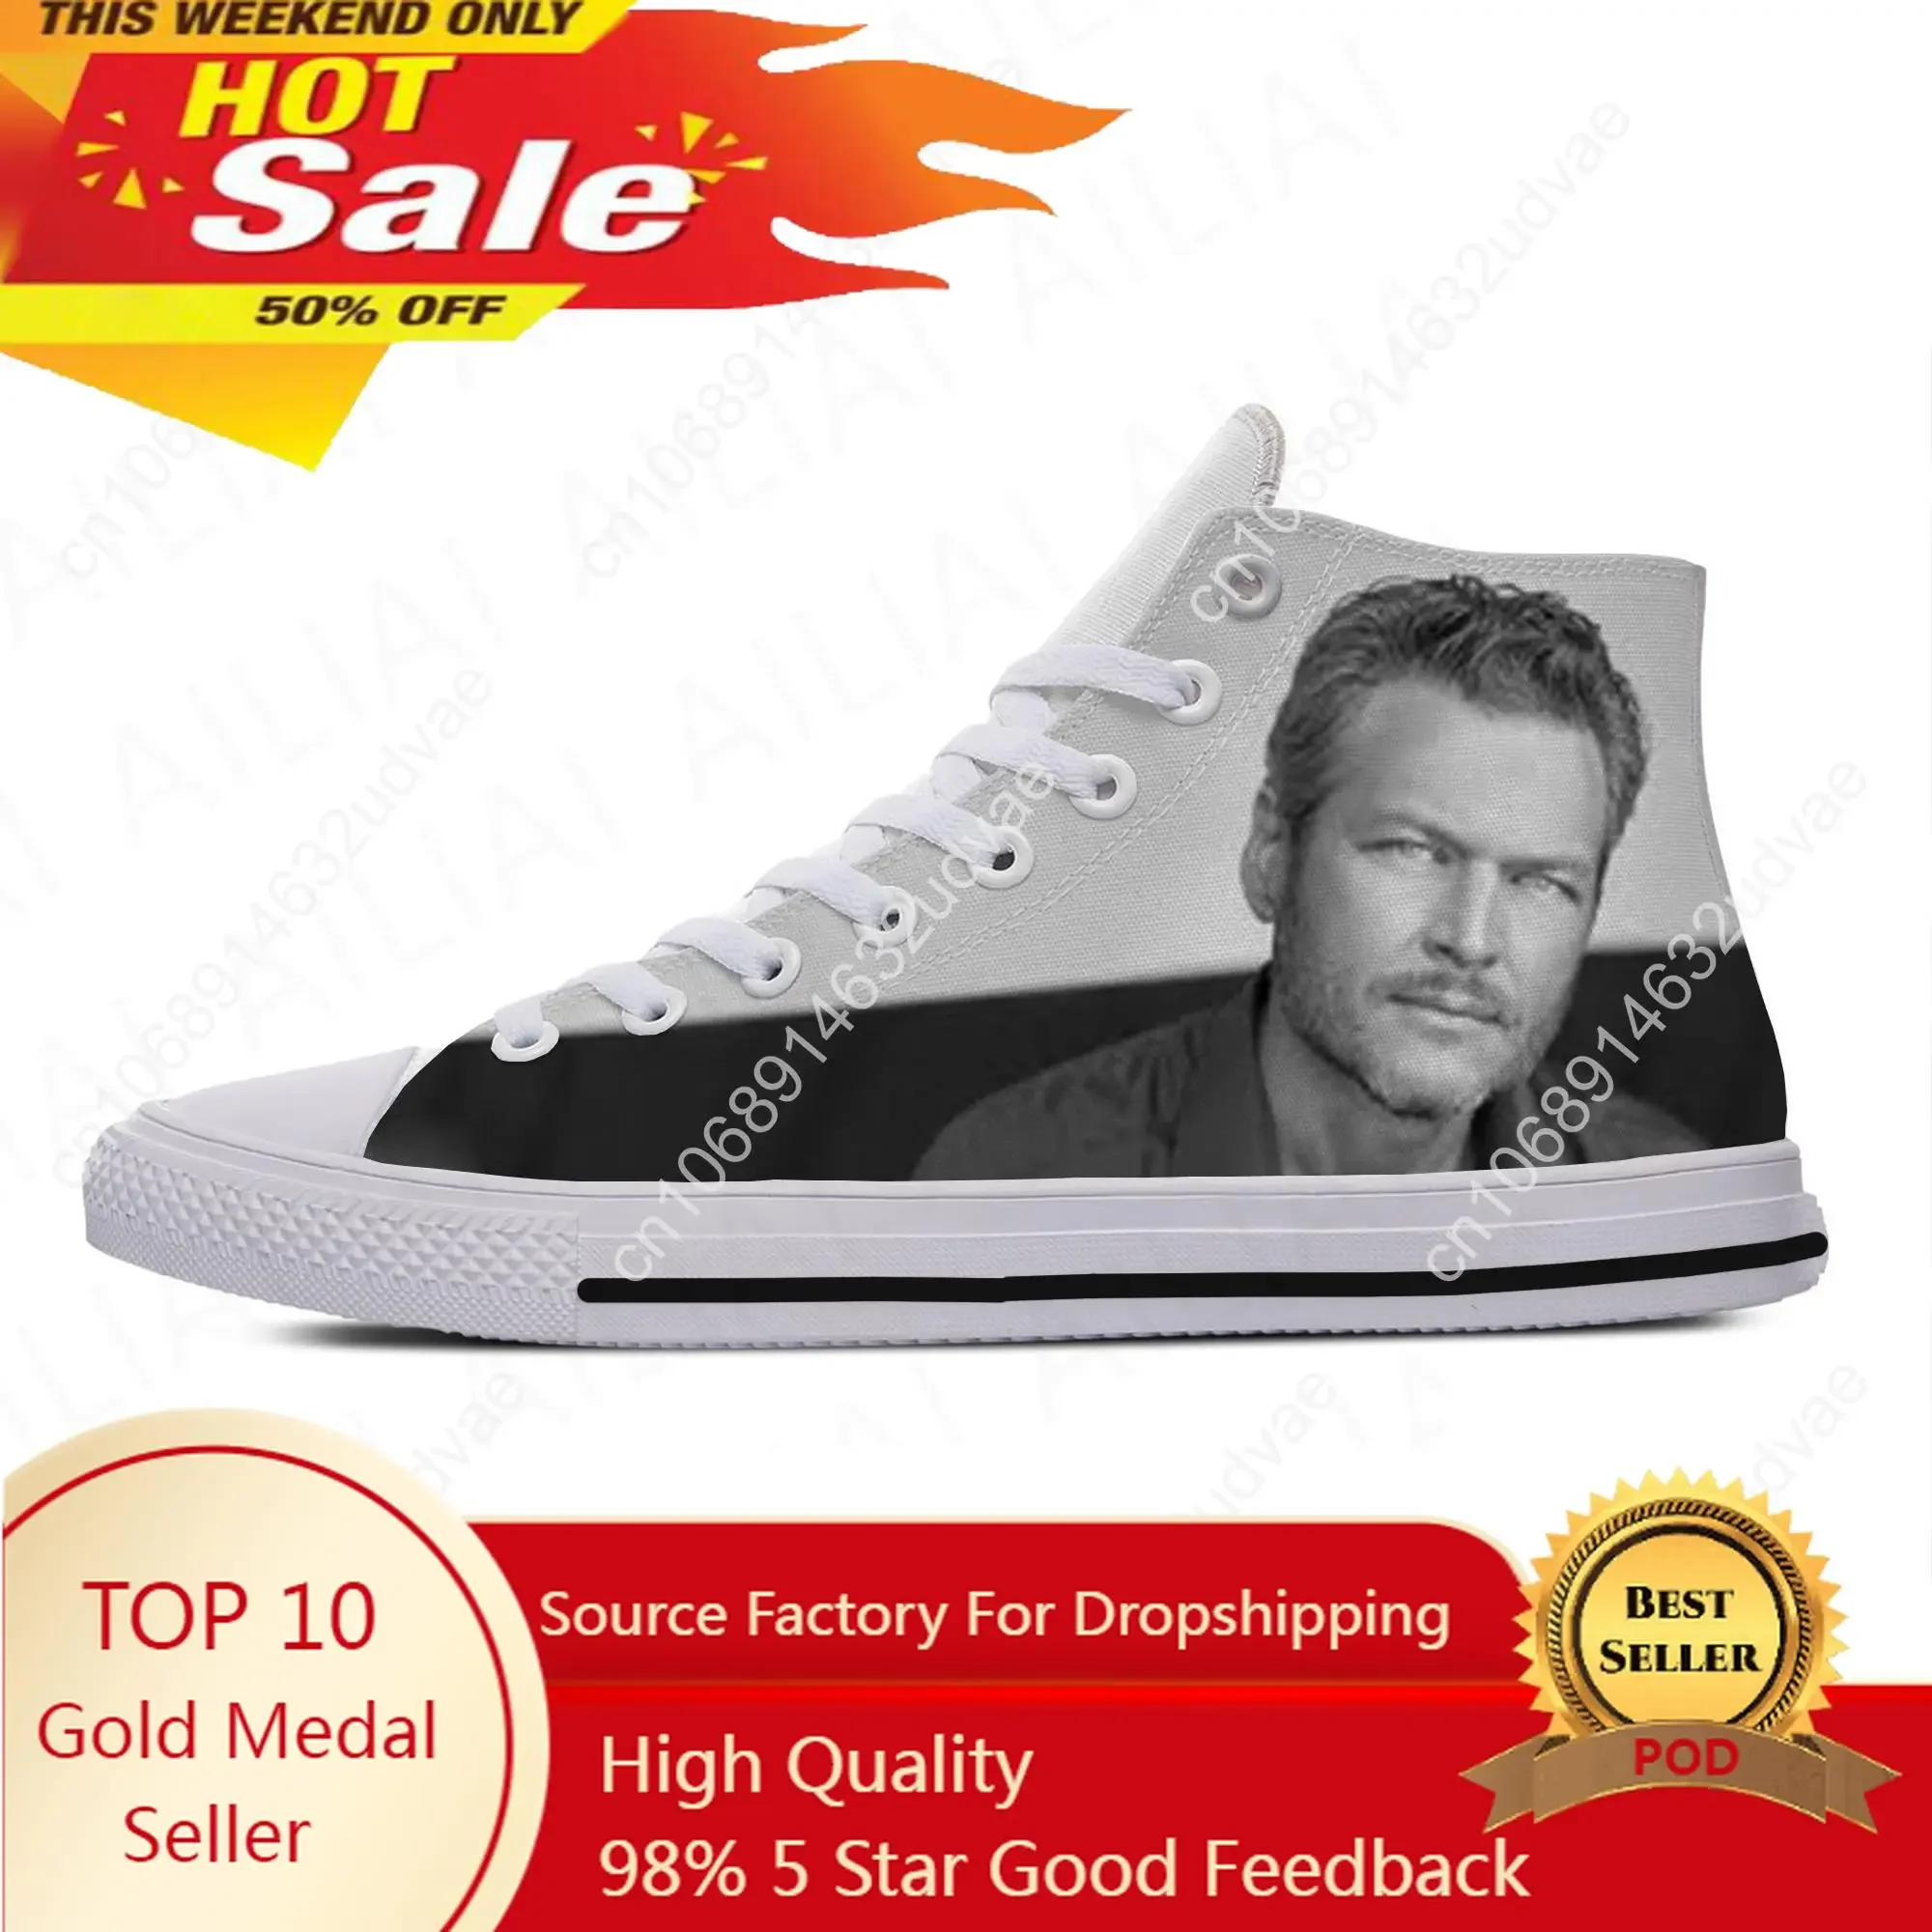 

Hot Cool Fashion New Summer High Quality Sneakers Latest Casual Shoes Men Women Blake Shelton High Help Classic Board Shoes